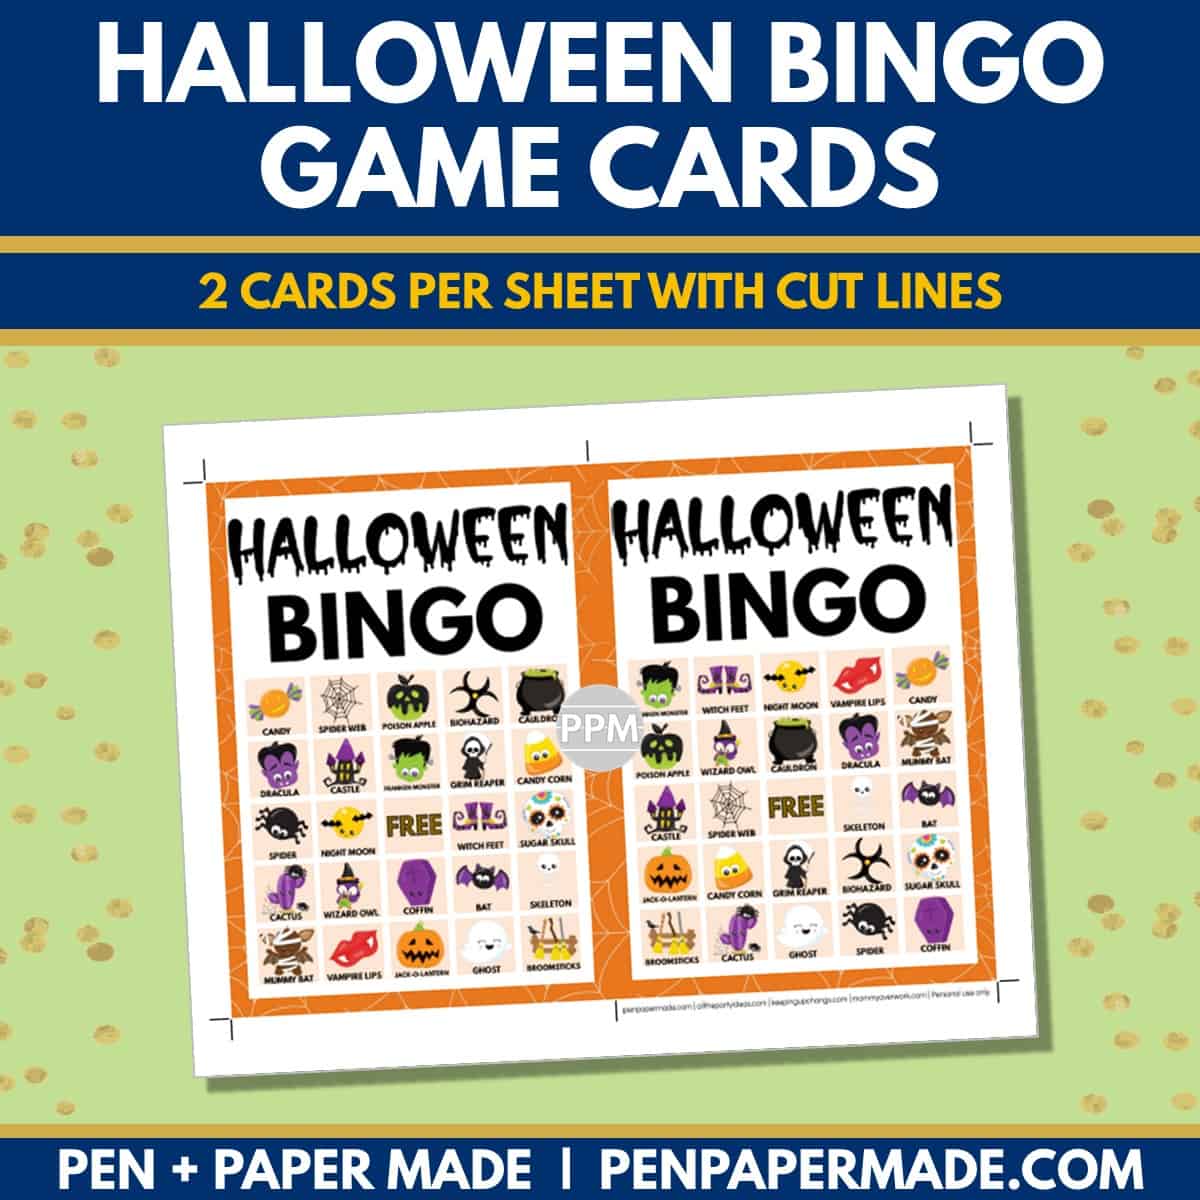 halloween bingo card 5x5 5x7 game boards with images and text words.